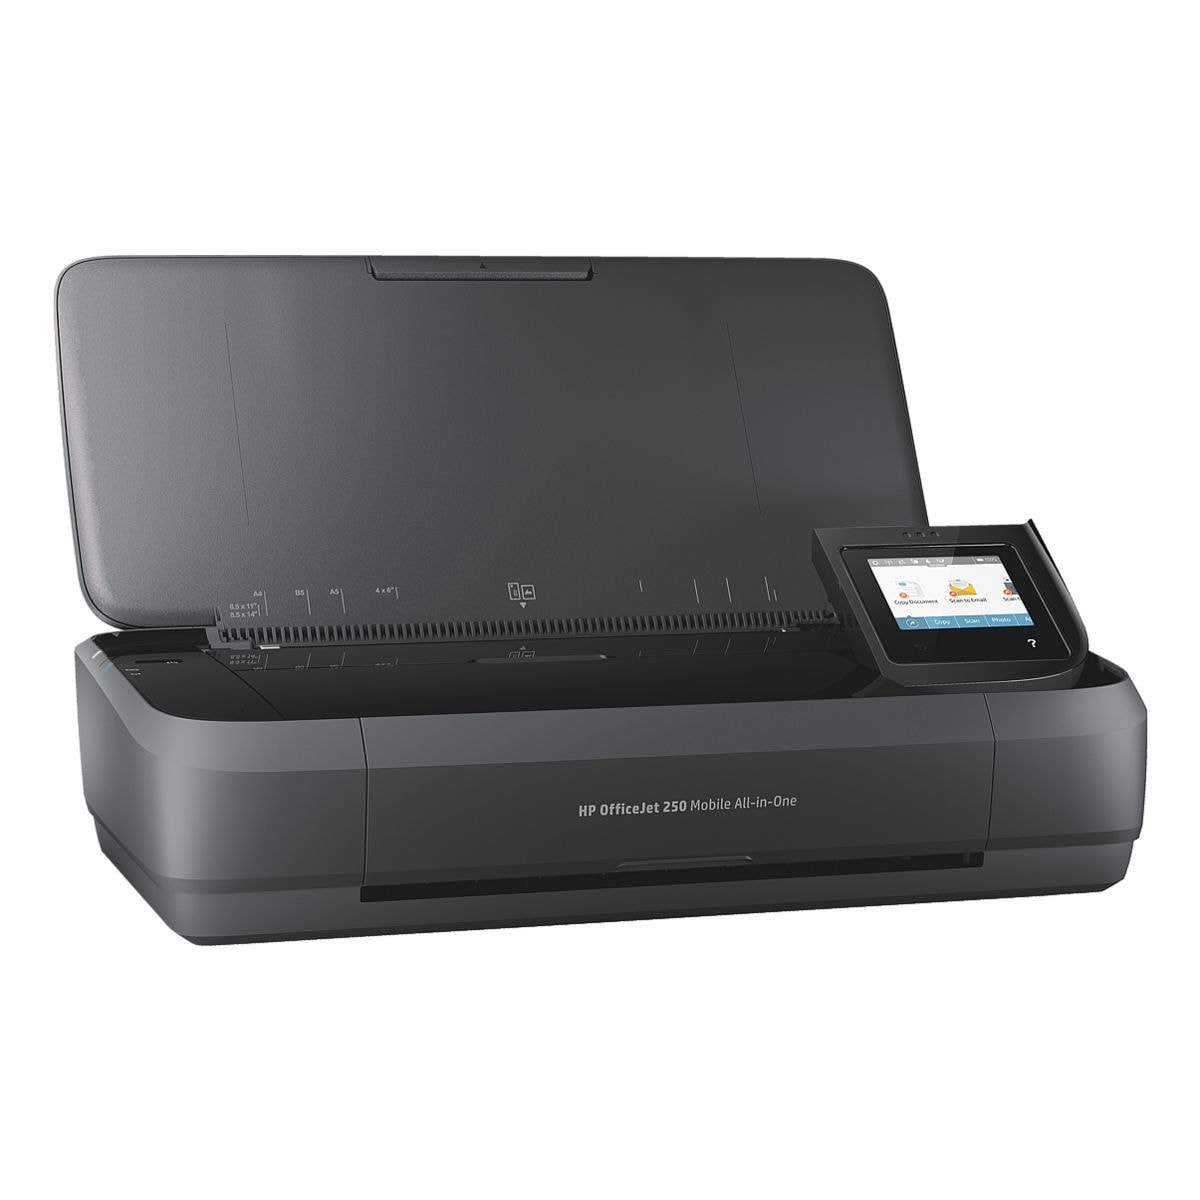 HP OfficeJet 250 All-in-One Multifunktionsdrucker, A4 Farb-Tintenstrahldrucker mit WLAN - HP Instant Ink-fhig